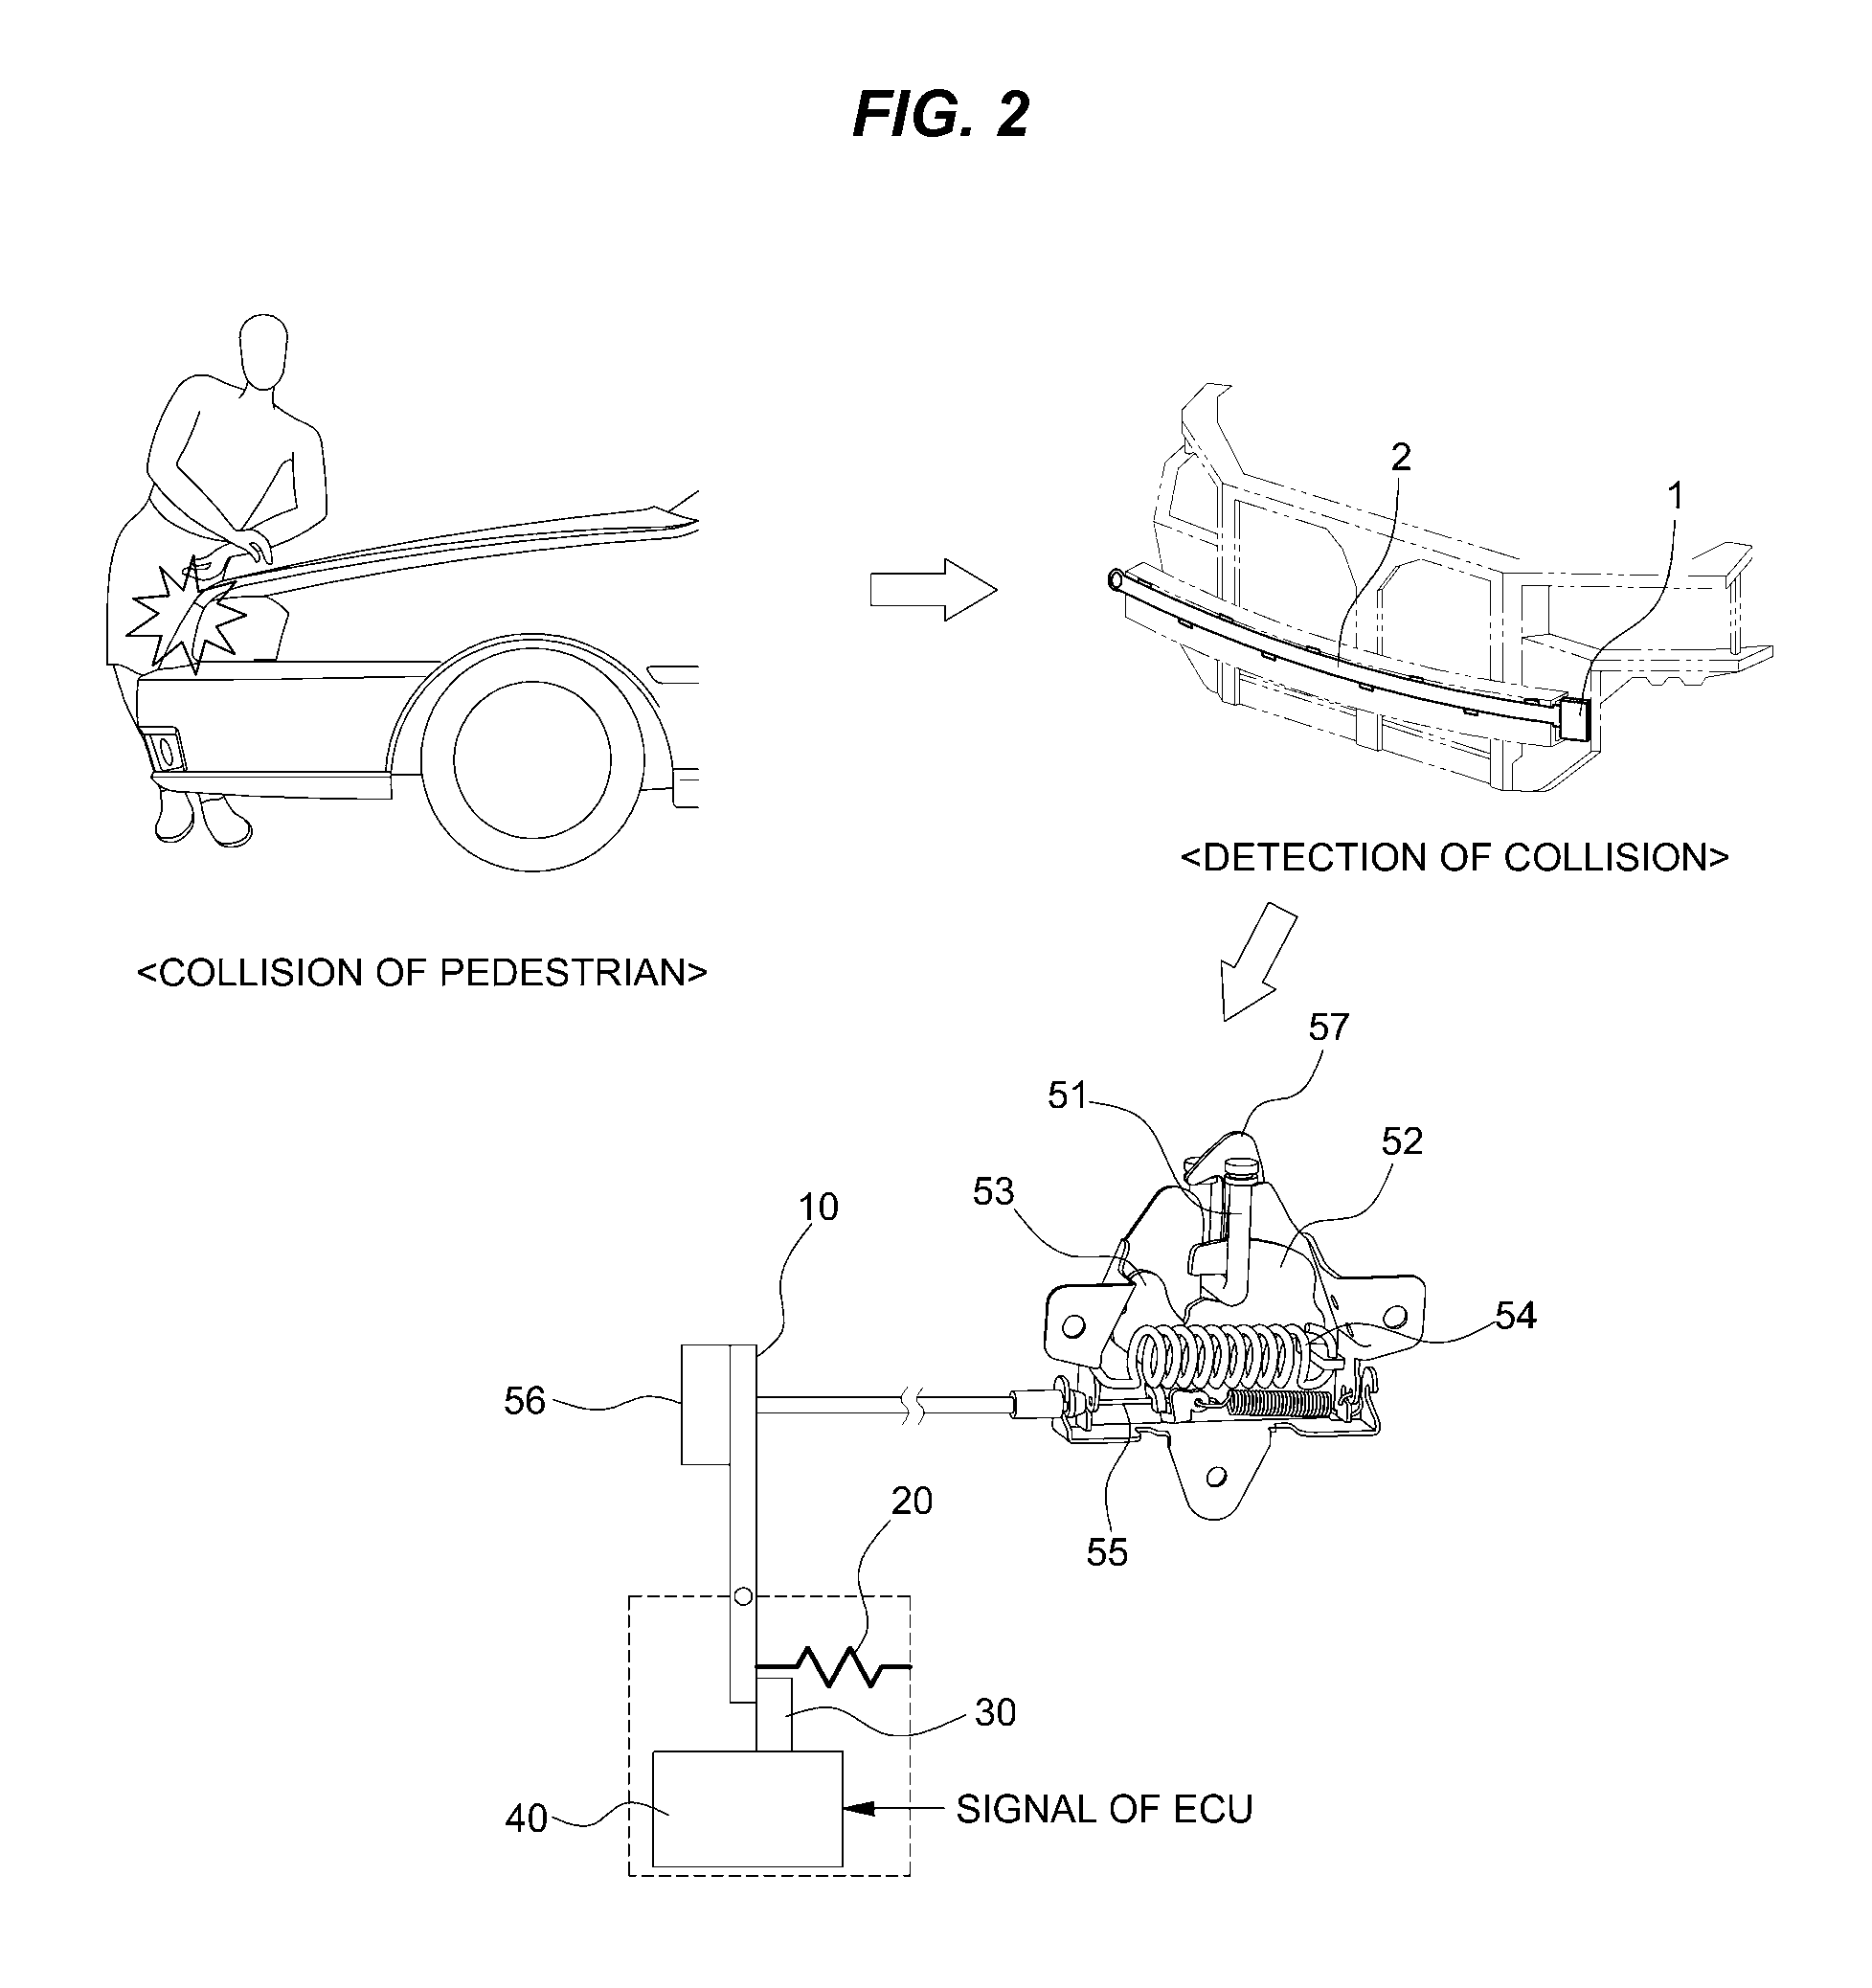 Active hood latch system for vehicle